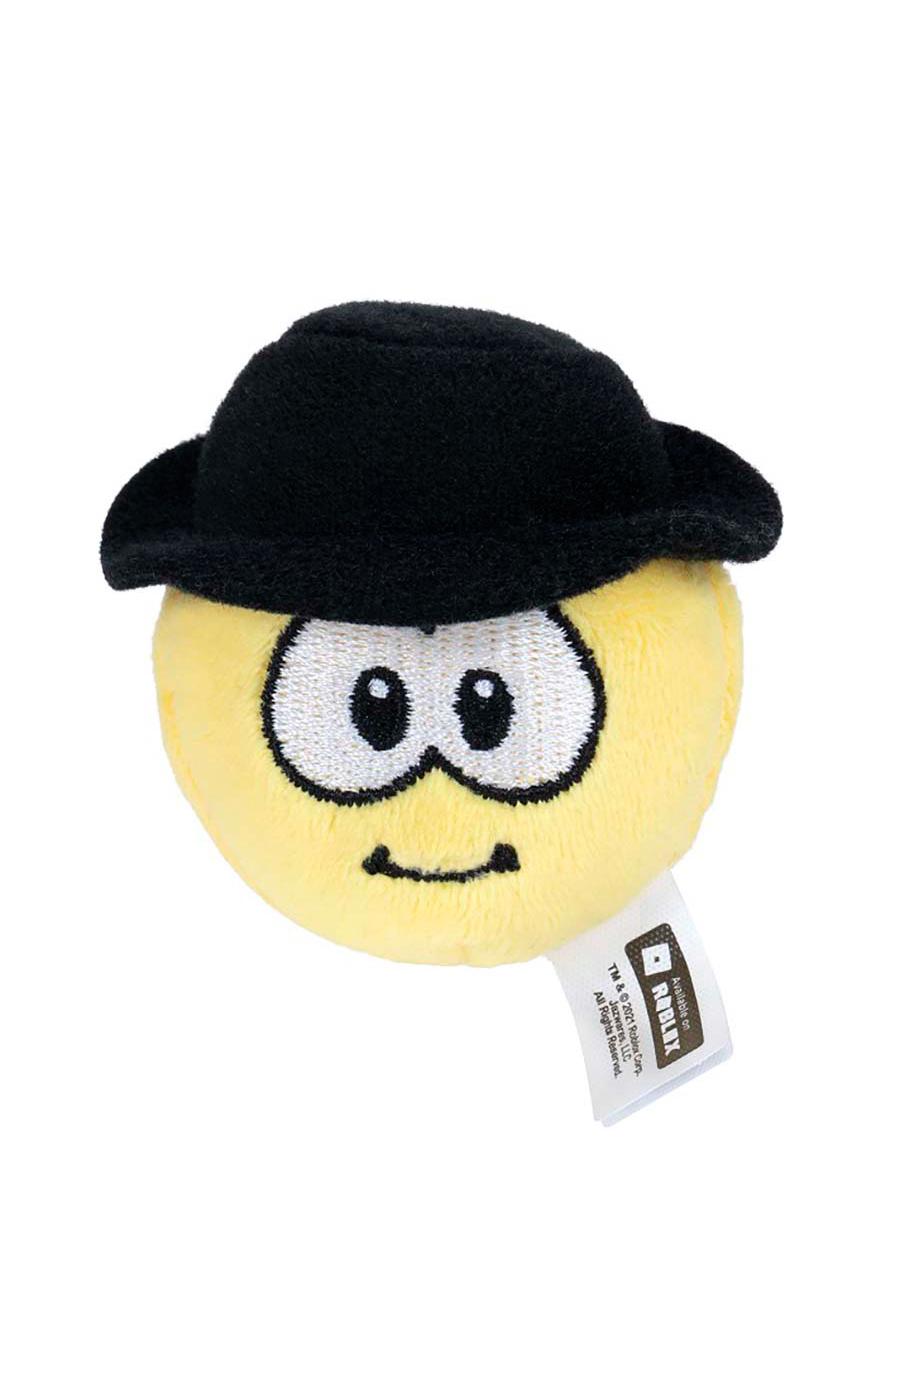 Meep City Micro Plush Mystery, available on Roblox; image 8 of 13